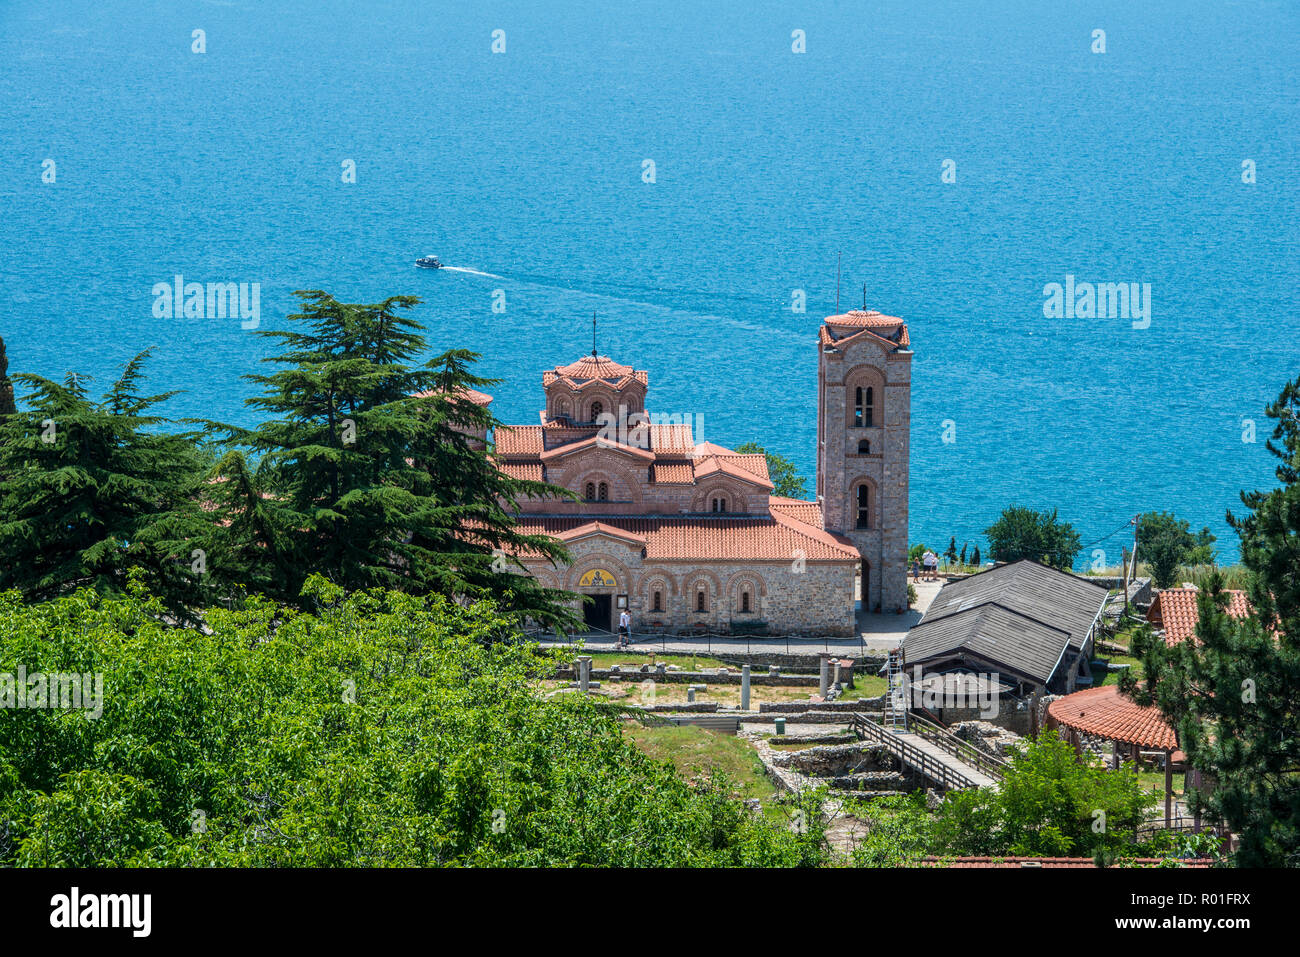 MACEDONIA, OHRID-LAKE, 06-08-2017. The Church Clement and Panteleimon at the shore of Ohrid Lake is a UNESCO world heritage site Stock Photo